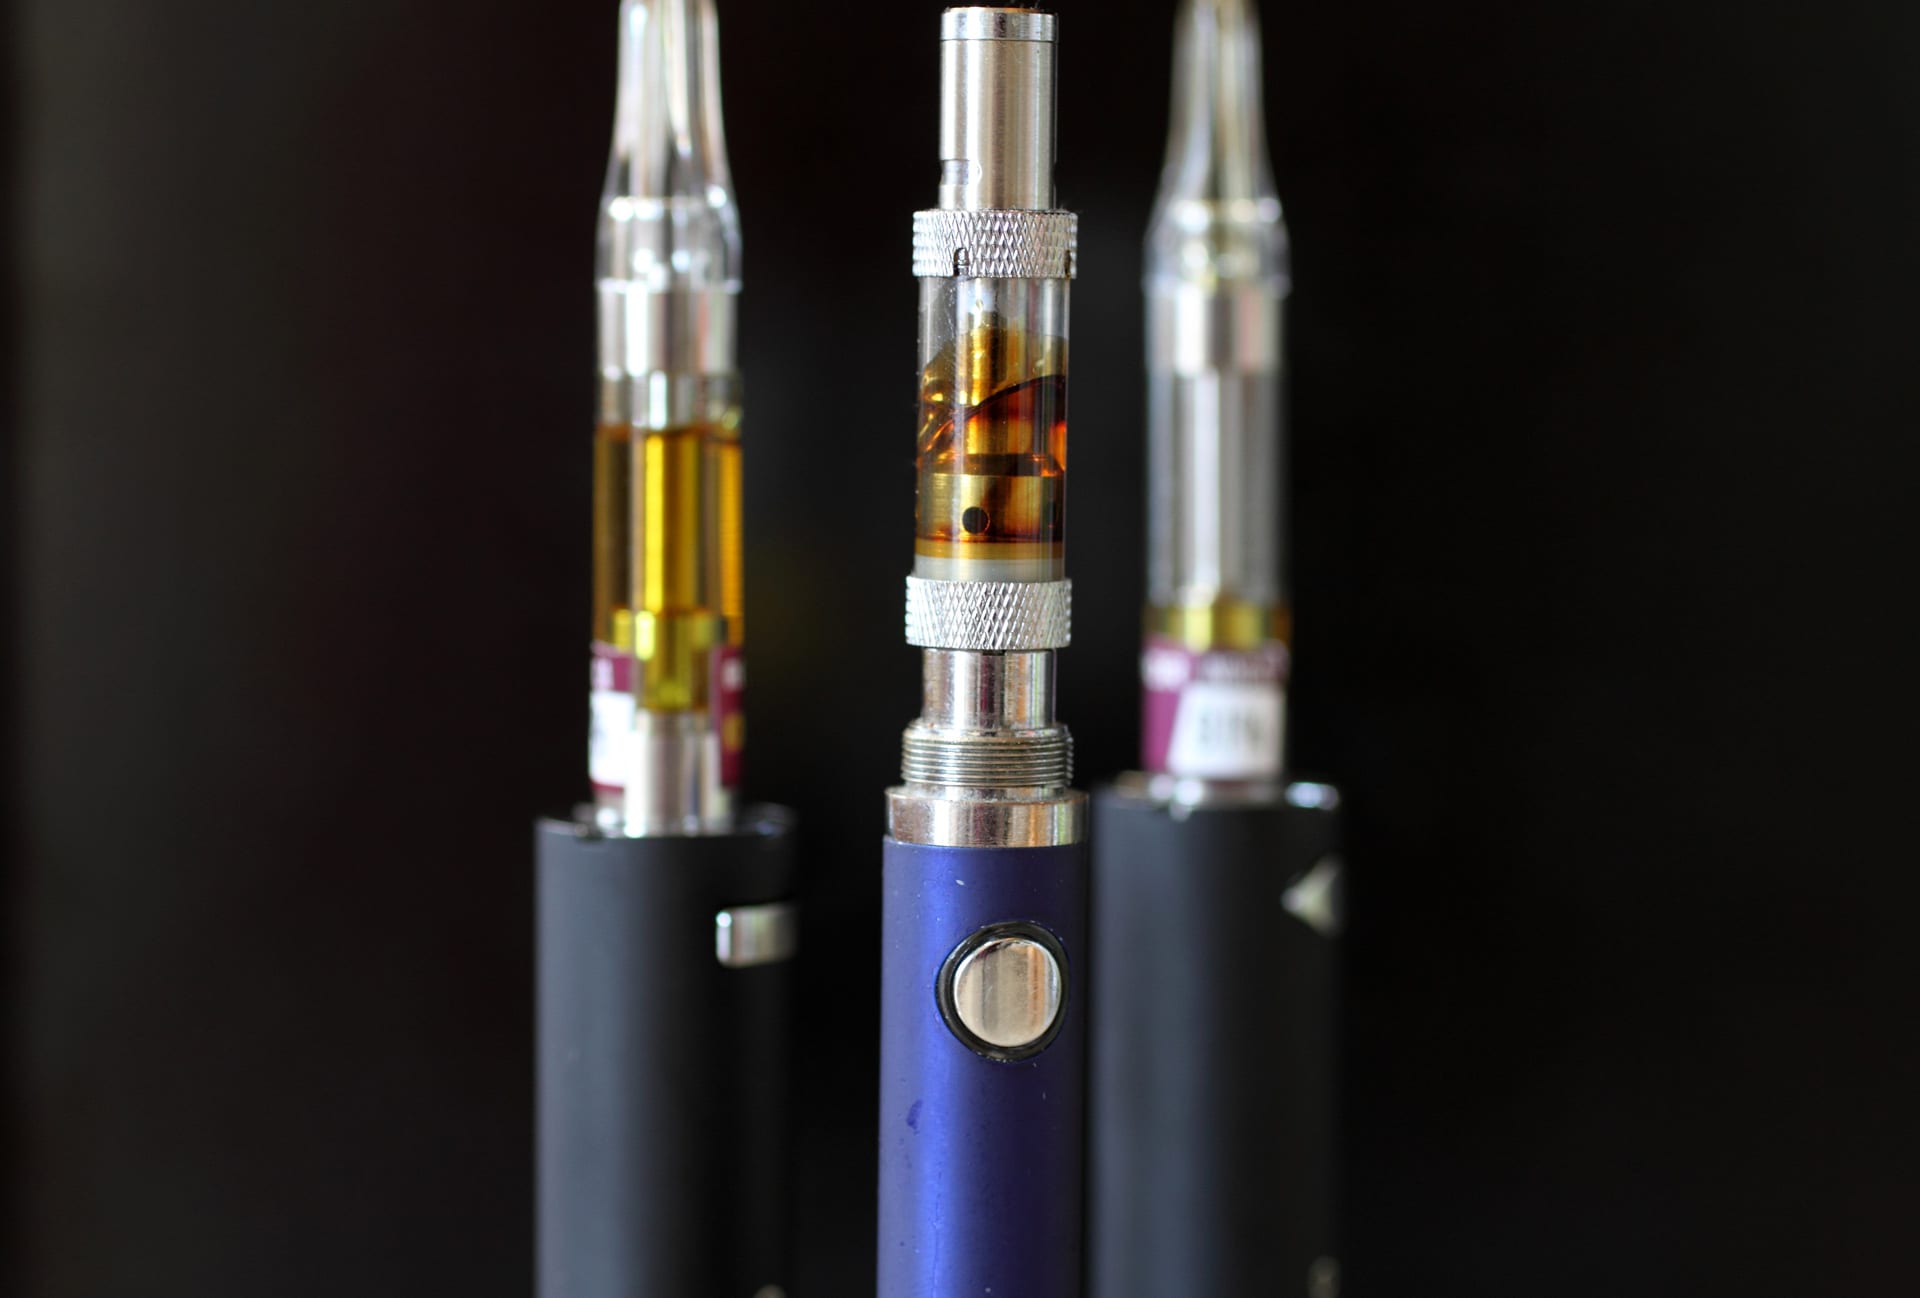 How To Use Cannabis Vape Carts & Batteries